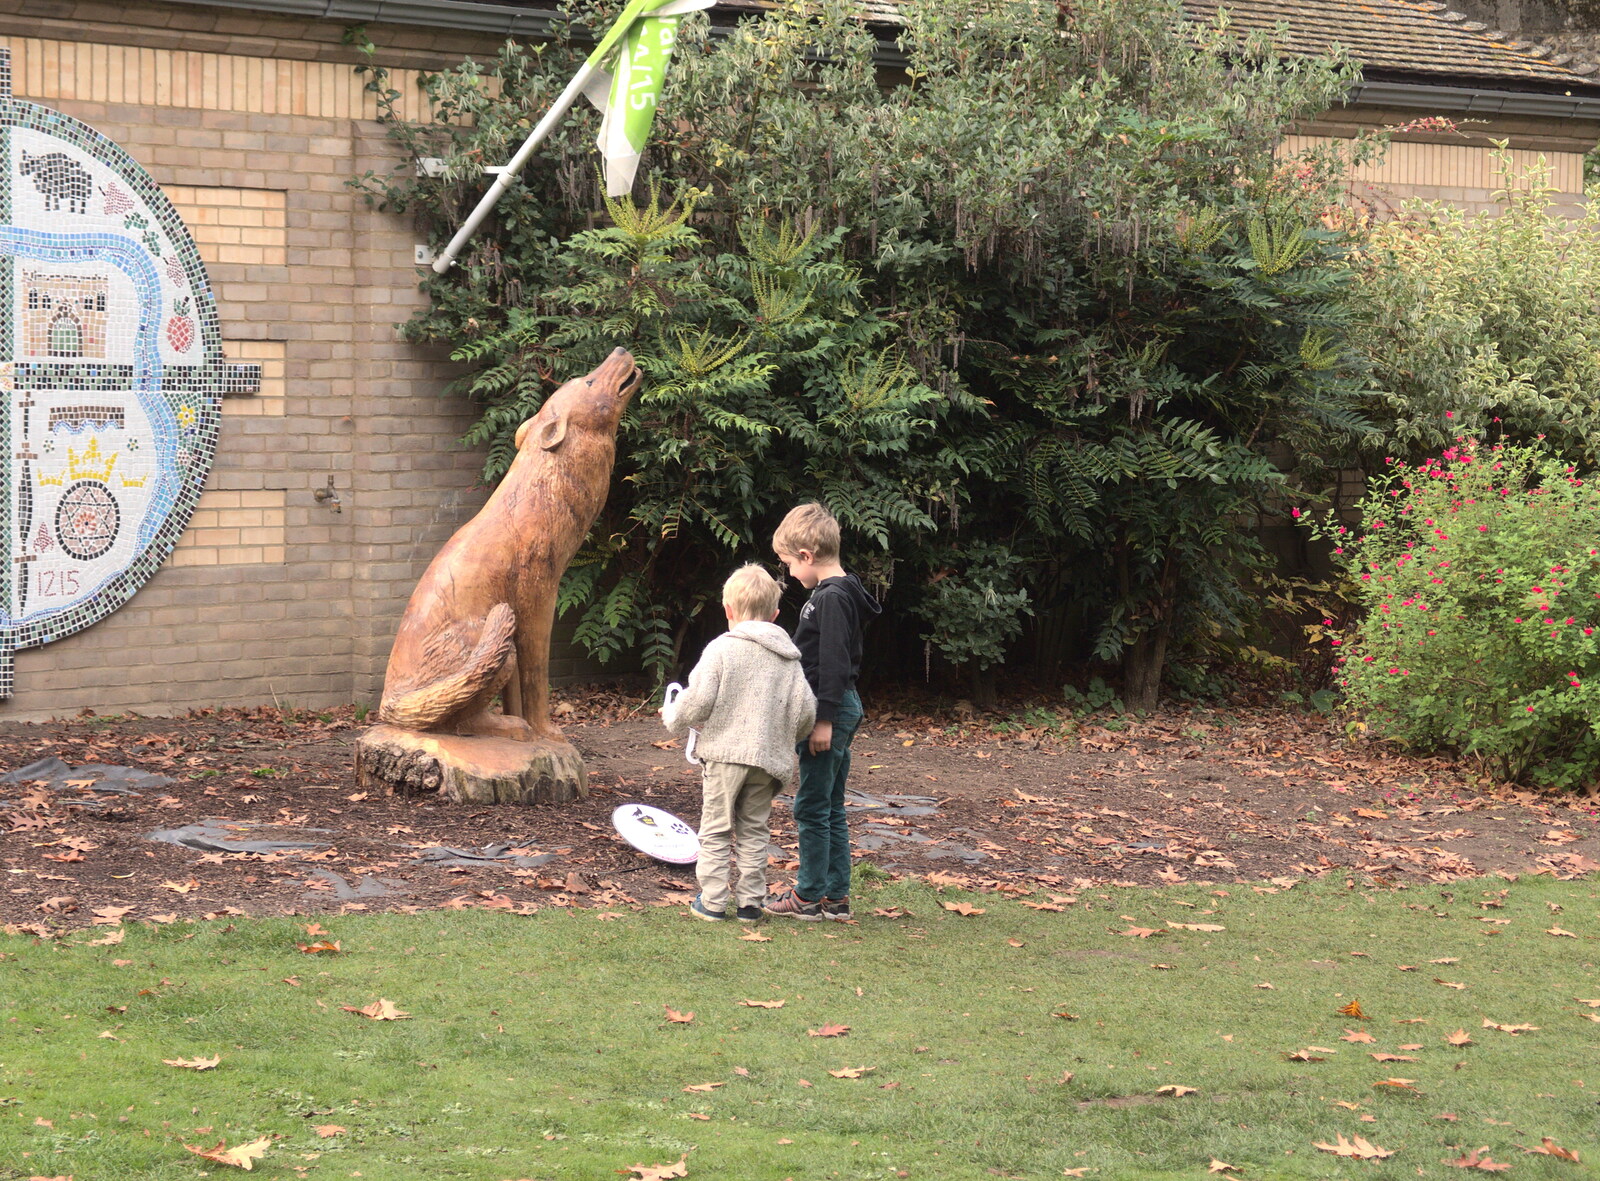 There's a wooden wolf in the gardens from Abbey Gardens in Autumn, Bury St. Edmunds, Suffolk - 27th October 2015